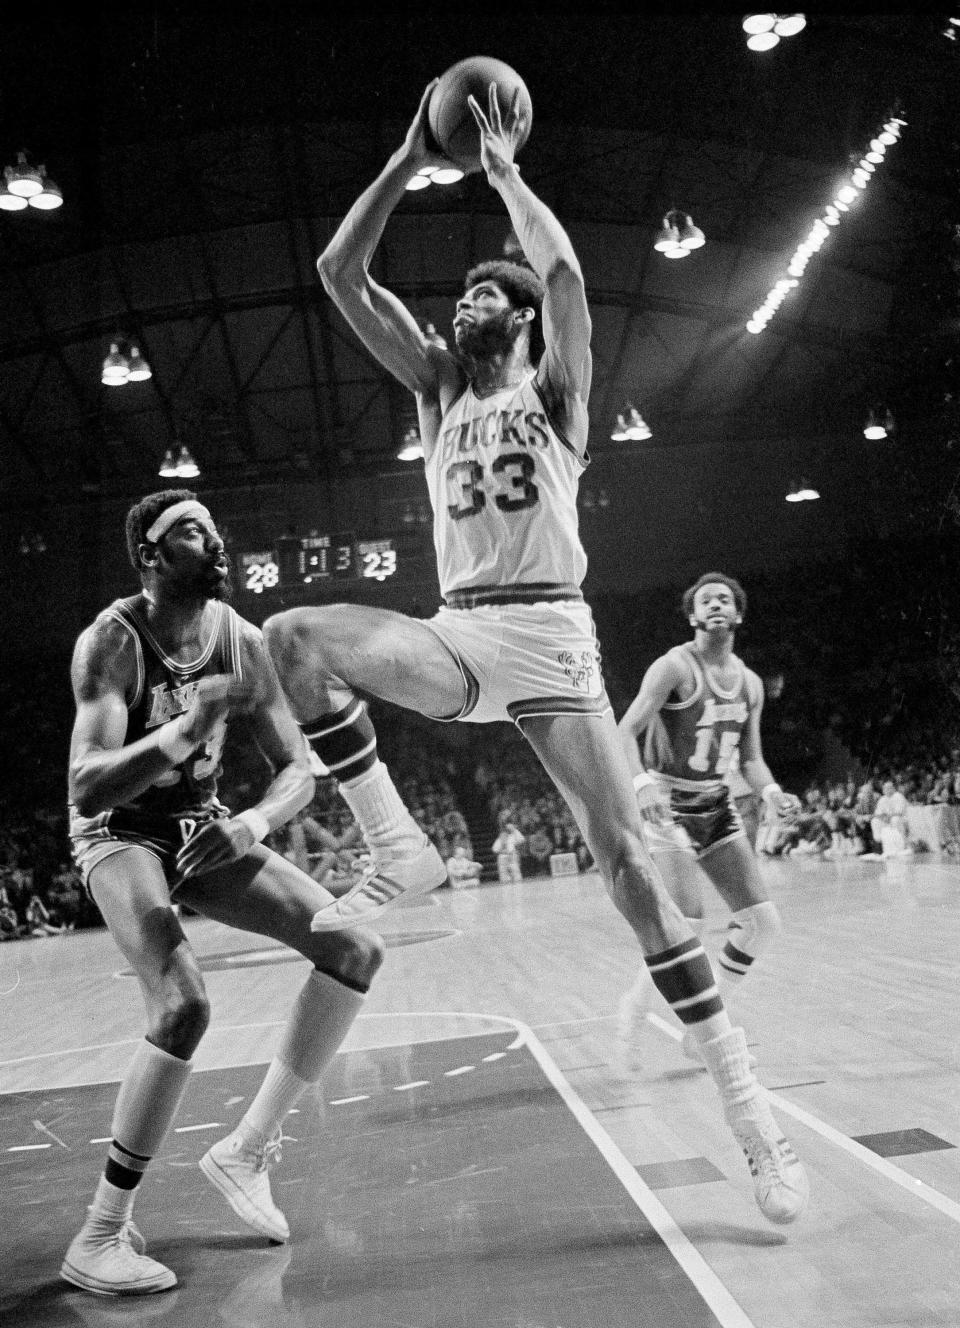 Milwaukee Bucks star Lew Alcindor (33) stretches his long frame as he drives past the Los Angeles Lakers' Wilt Chamberlain during the 1971 NBA playoffs at Milwaukee. Alcindor changed his name legally to Kareem Abdul-Jabbar heading into the 1971-72 season.